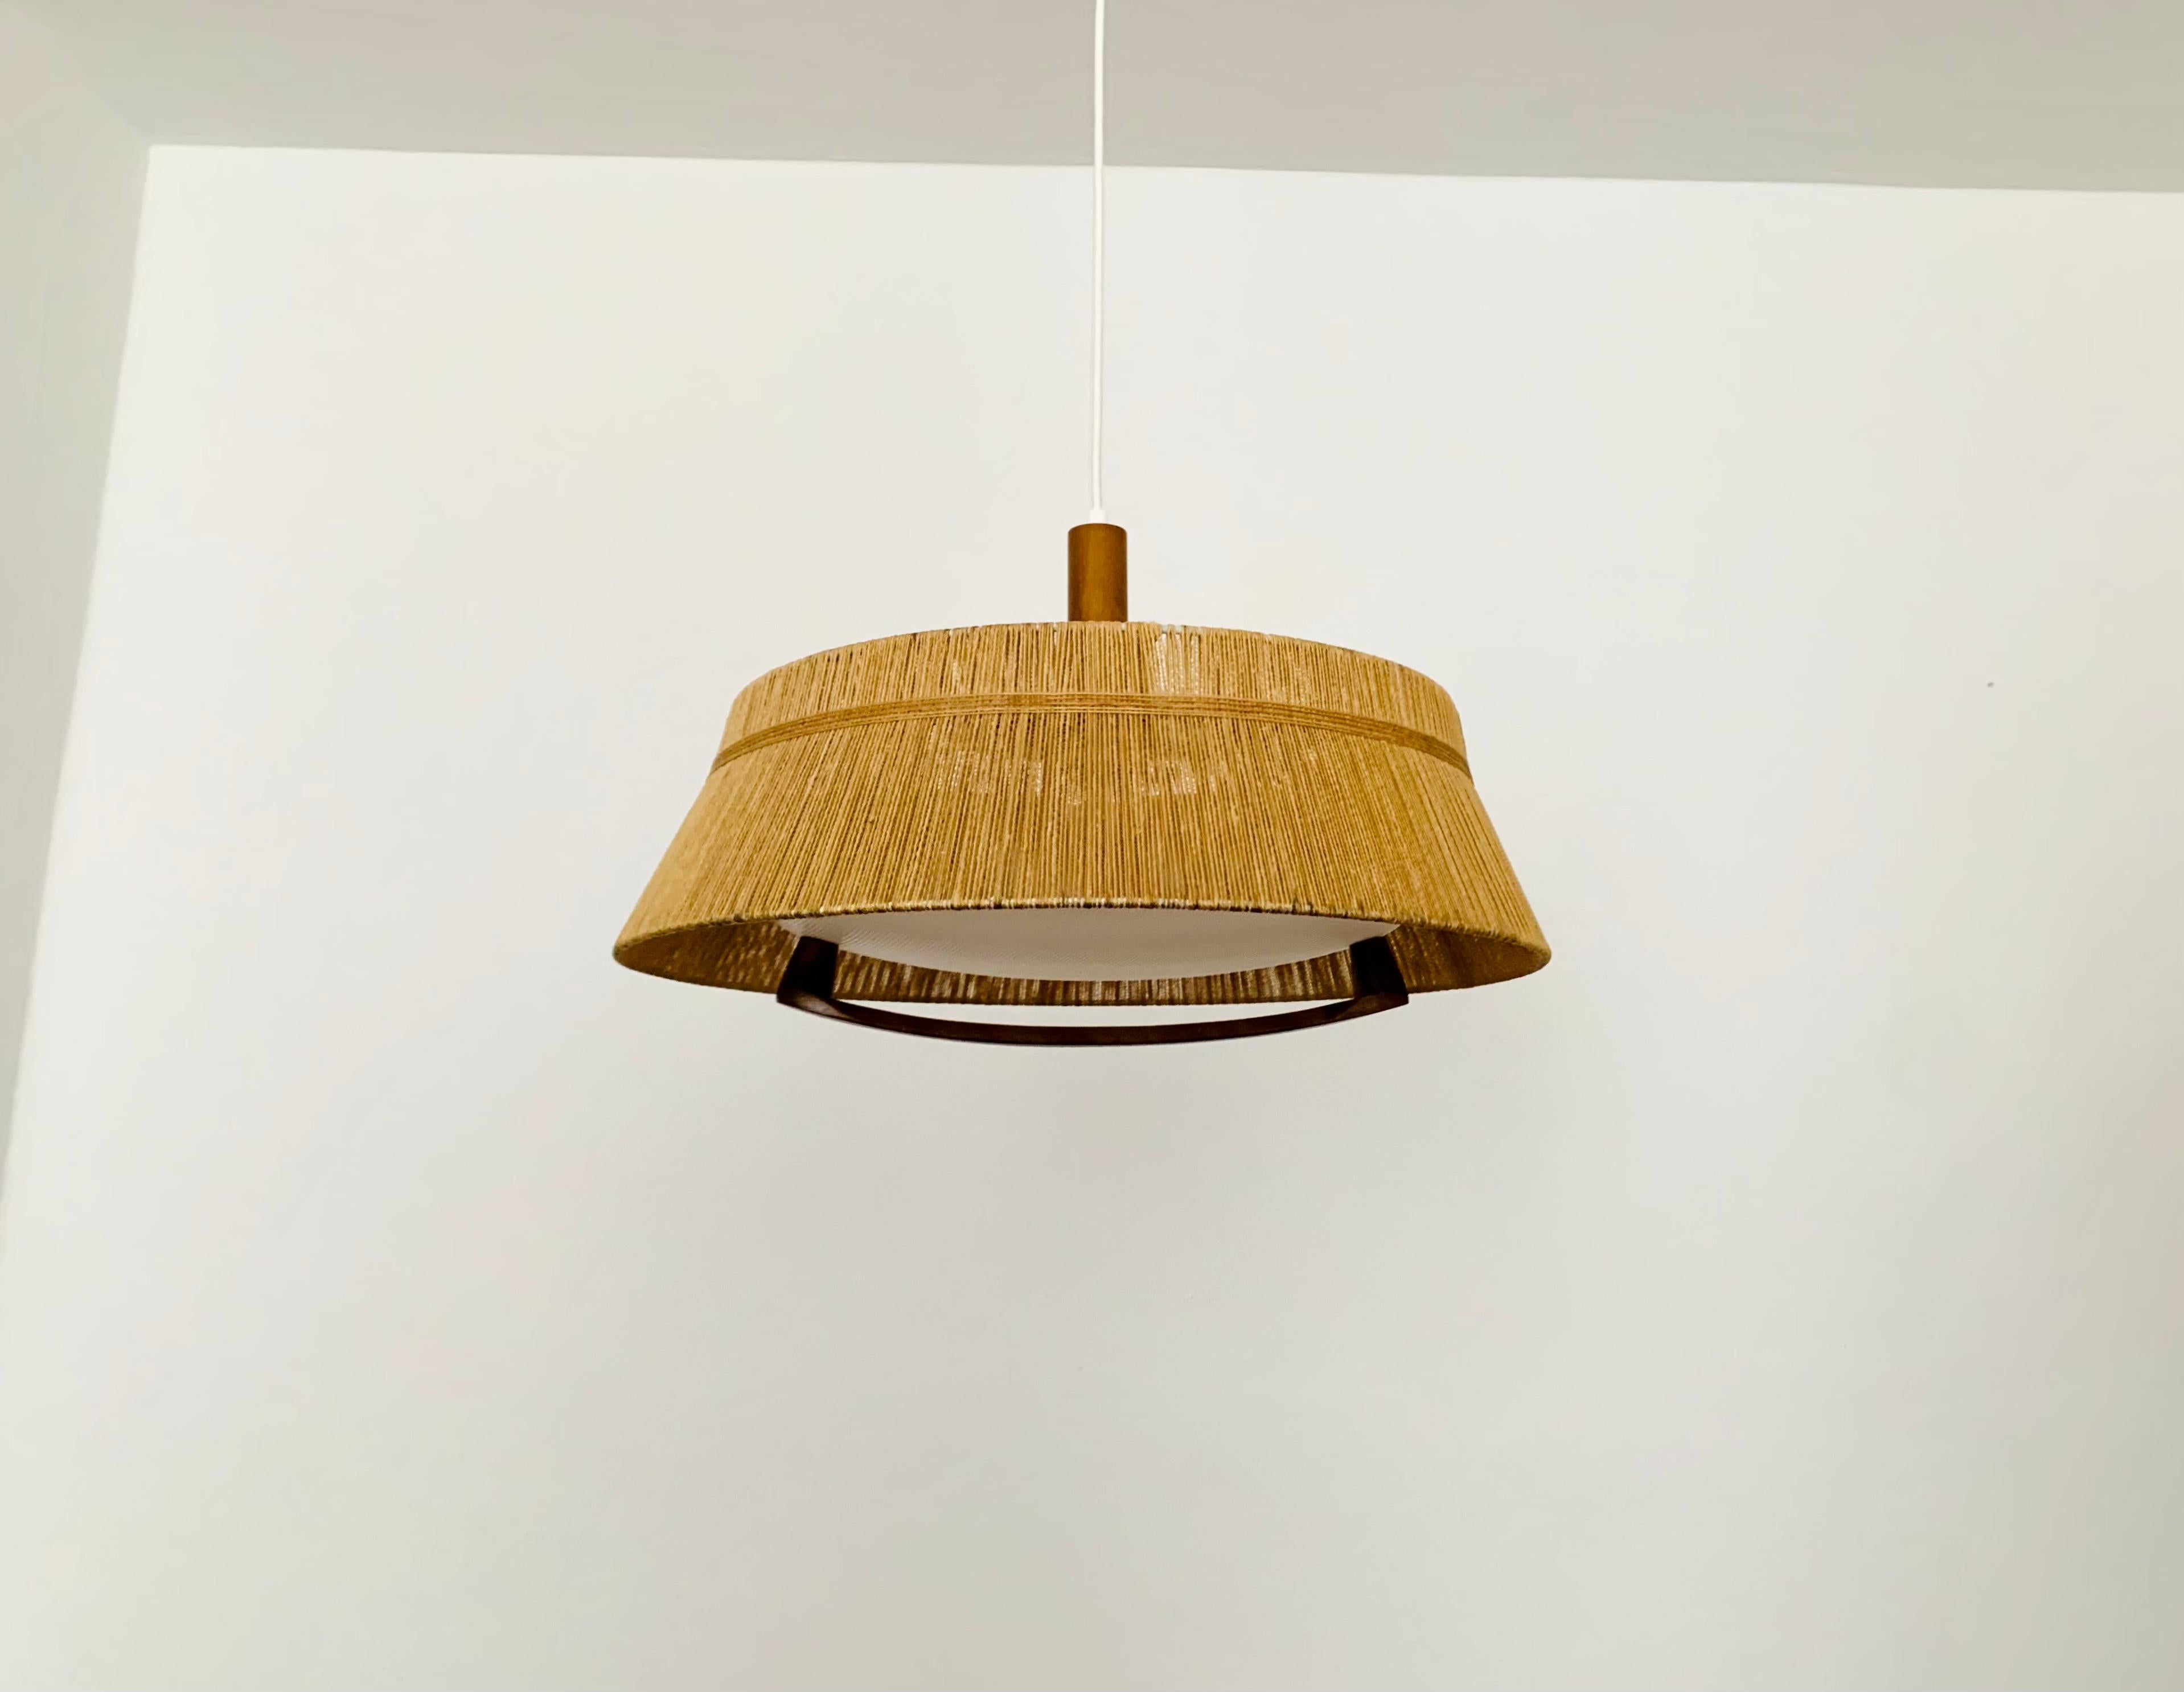 Exceptionally beautiful and large pendant lamp from the 1960s.
The design is very unusual.
The shape and materials create a warm and very pleasant light.

Manufacturer: Temde

Condition:

Very good vintage condition with slight signs of age-related